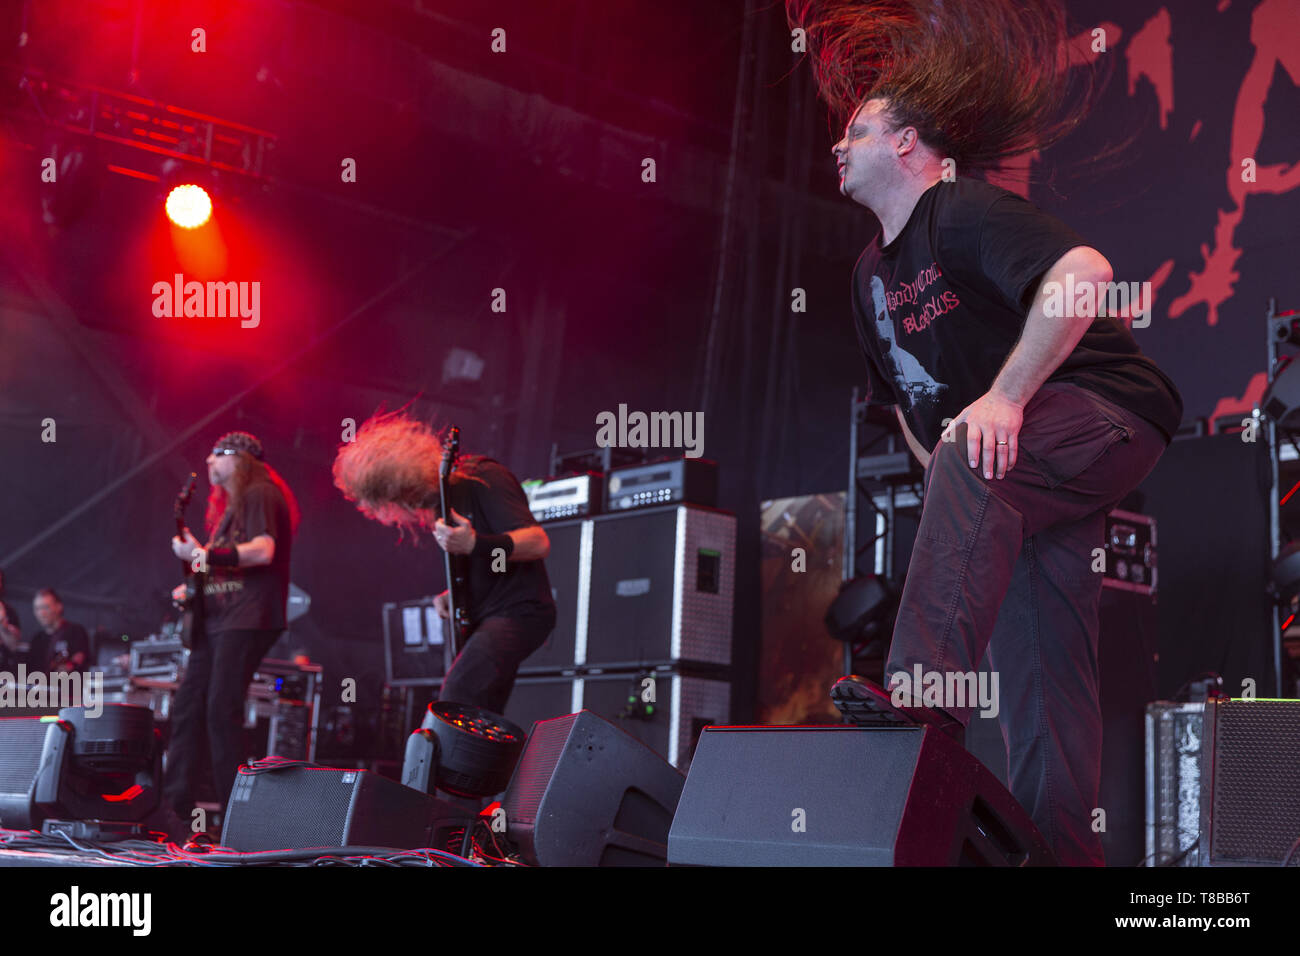 May 11, 2019 - West Palm Beach, Florida, USA - Death Metal band Cannibal Corpse performs in support of Slayer on their farewell tour. (Credit Image: © Adam DelGiudice/ZUMA Wire) Stock Photo